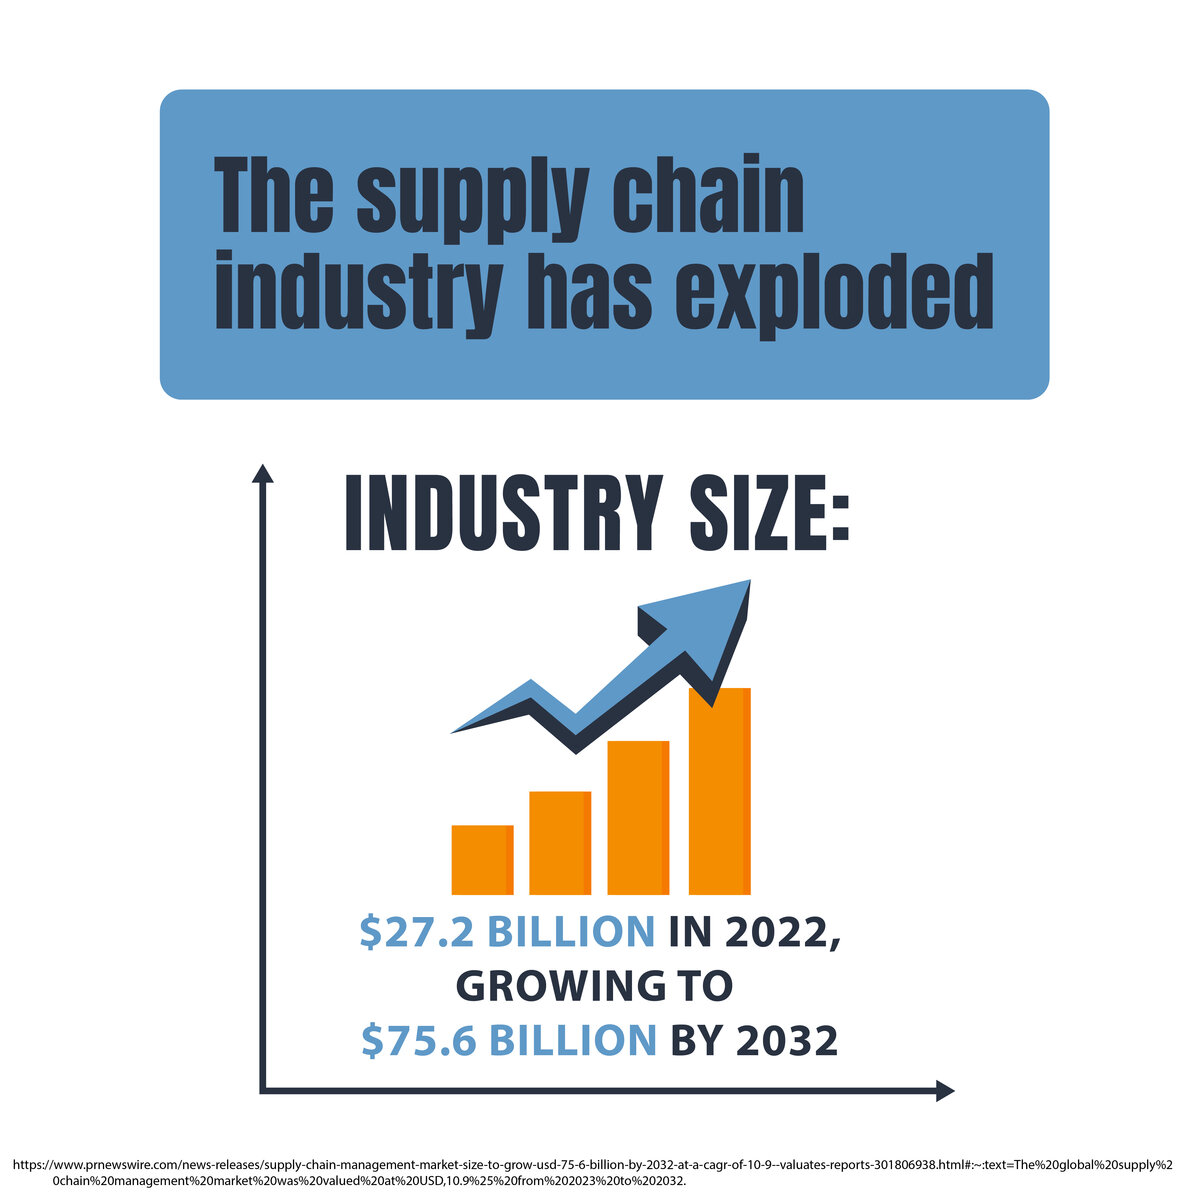 "The supply chain industry has exploded" with a bar chart showing growth